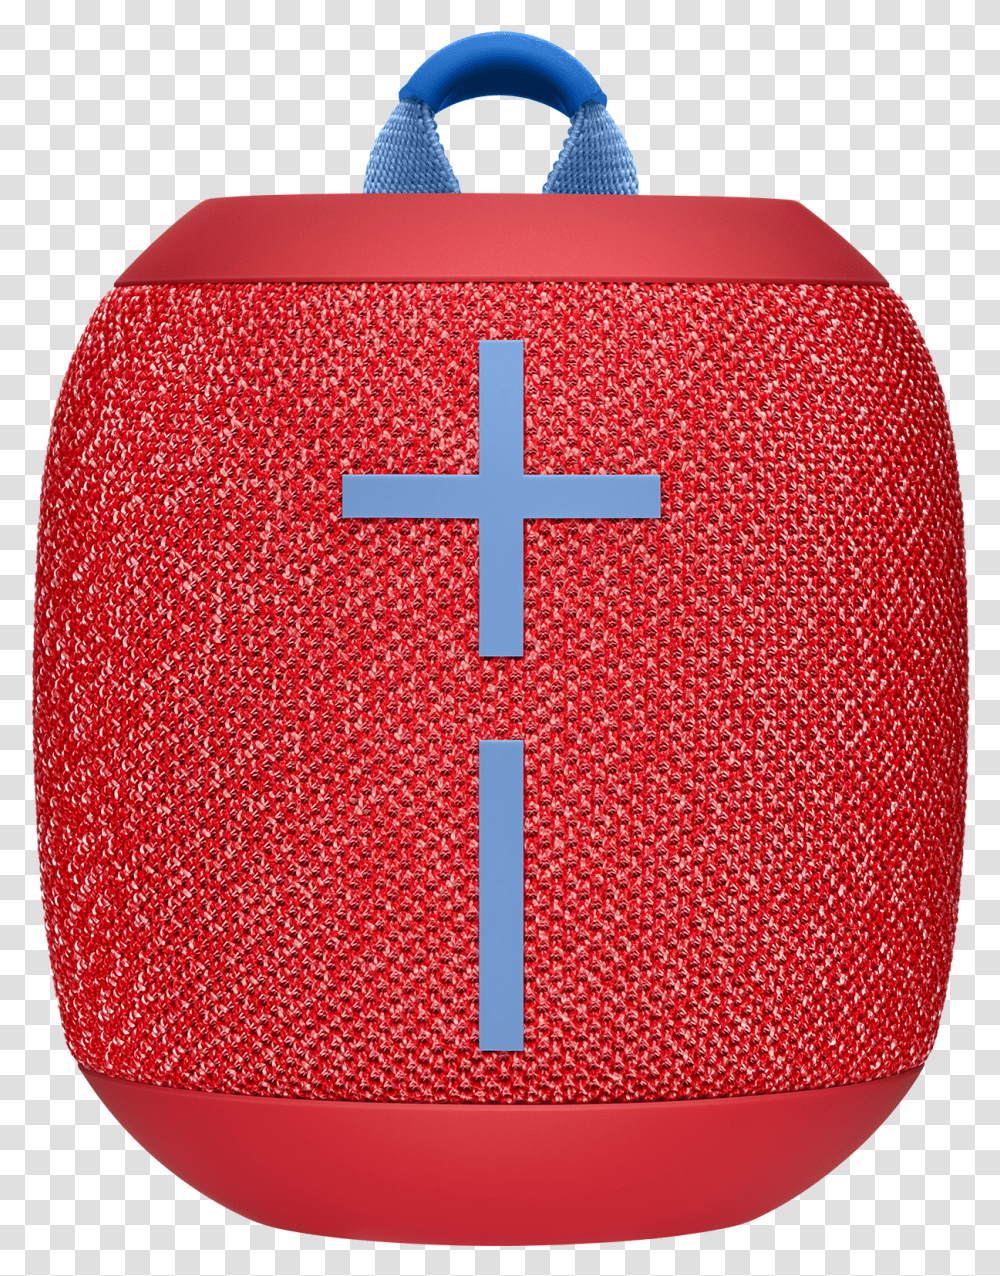 Ultimate Ears Wonderboom Test, First Aid, Cross, Church Transparent Png